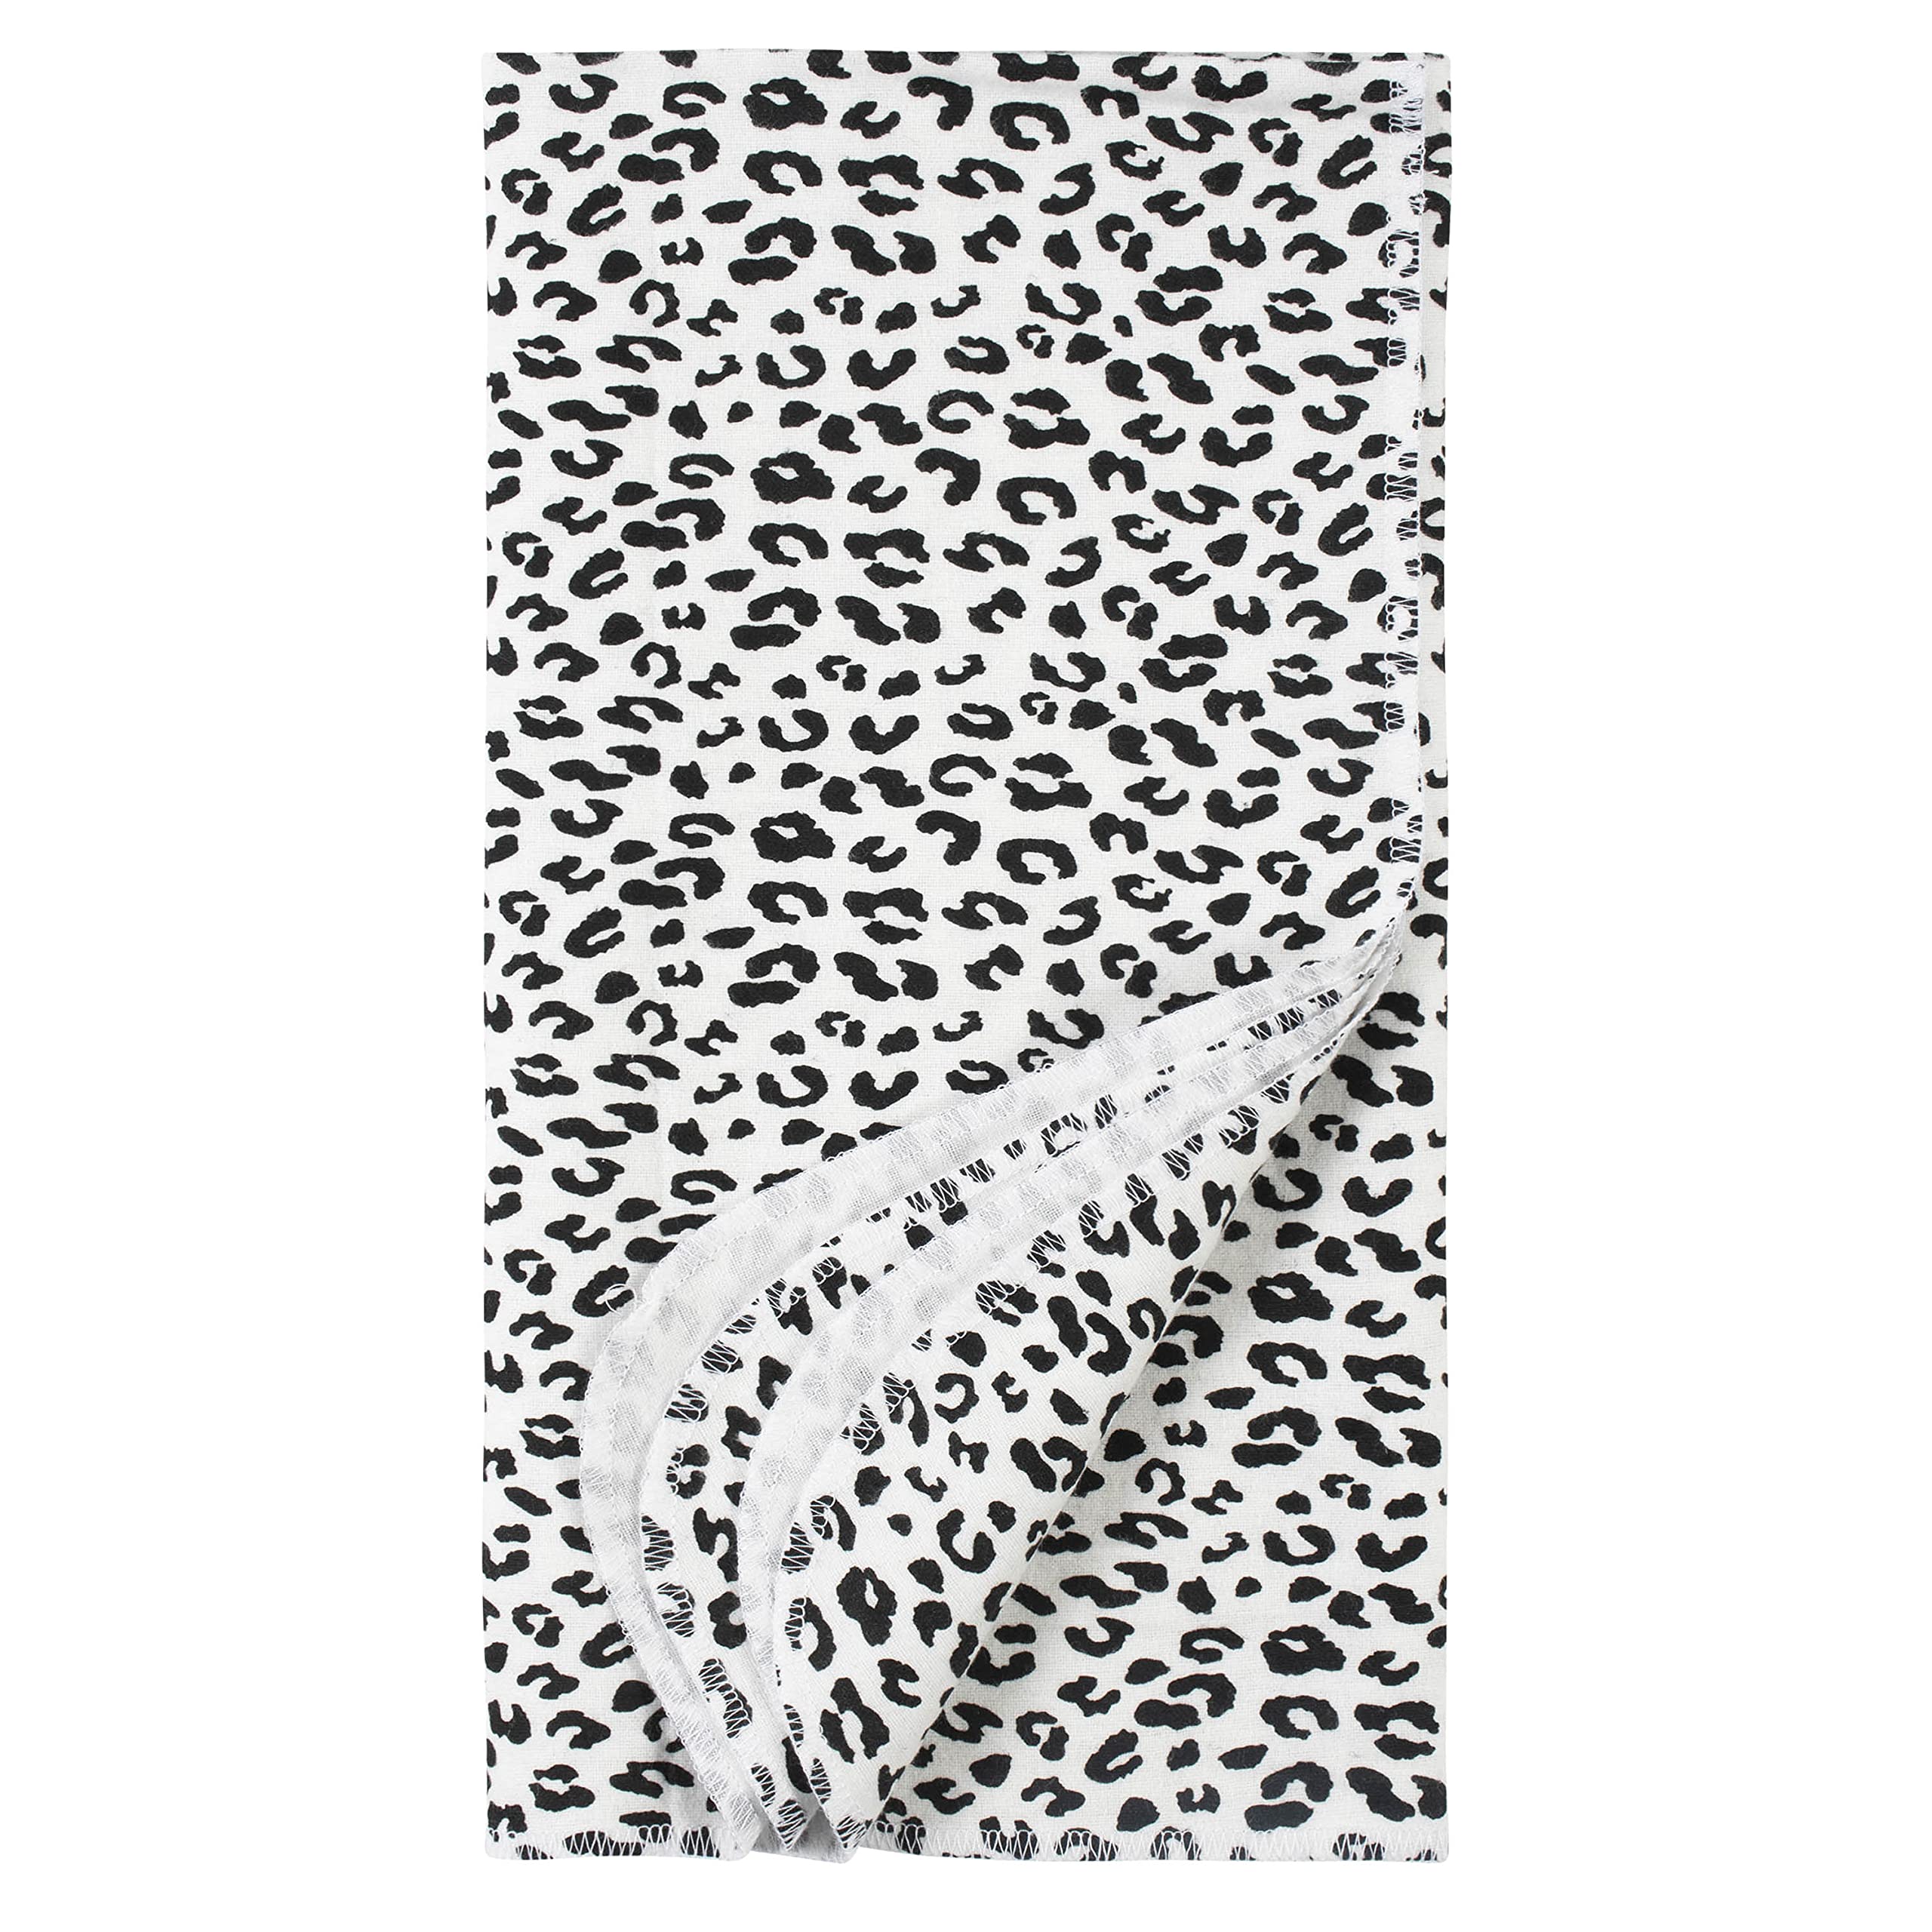 Gerber Baby 4-Pack Flannel Receiving Blanket, Leopard Off White, One Size,4 Count (Pack of 1)